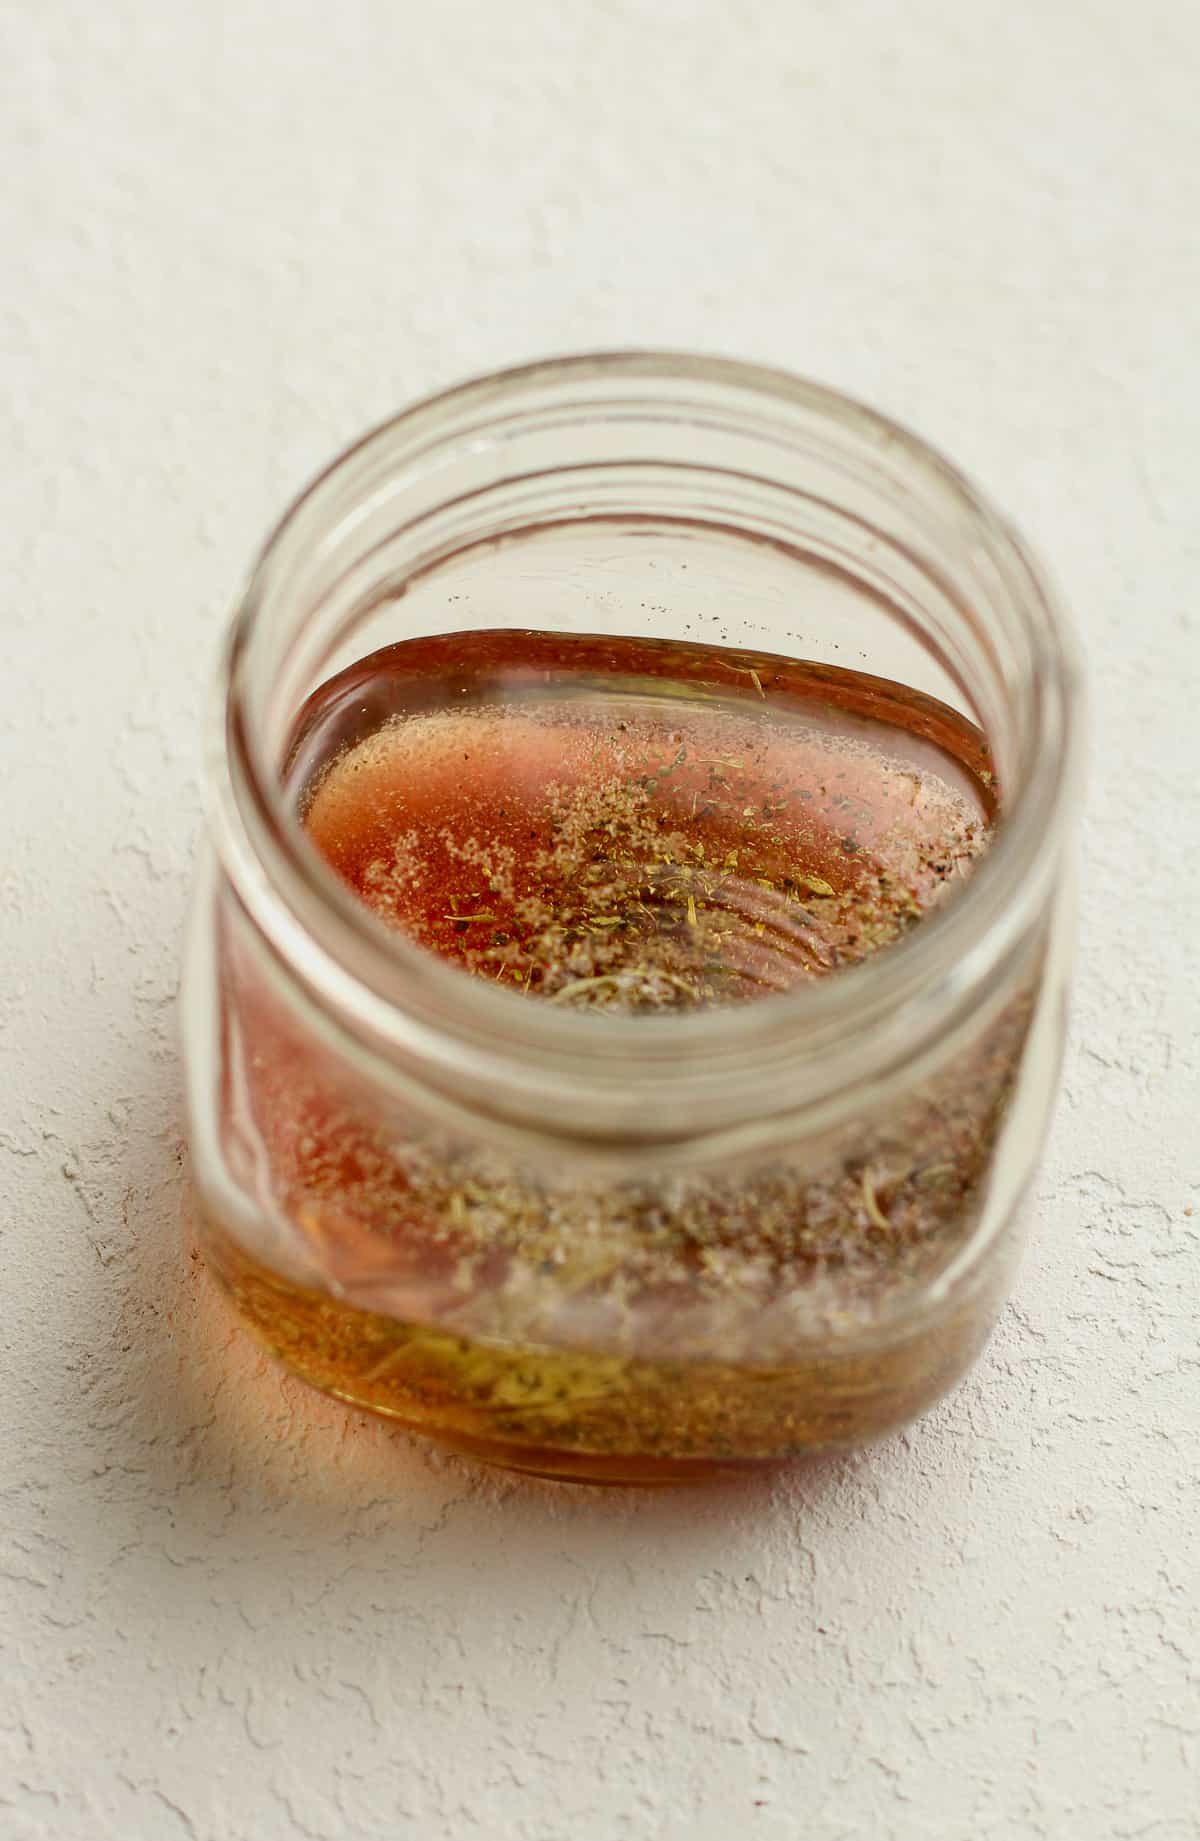 A jar of the dressing.